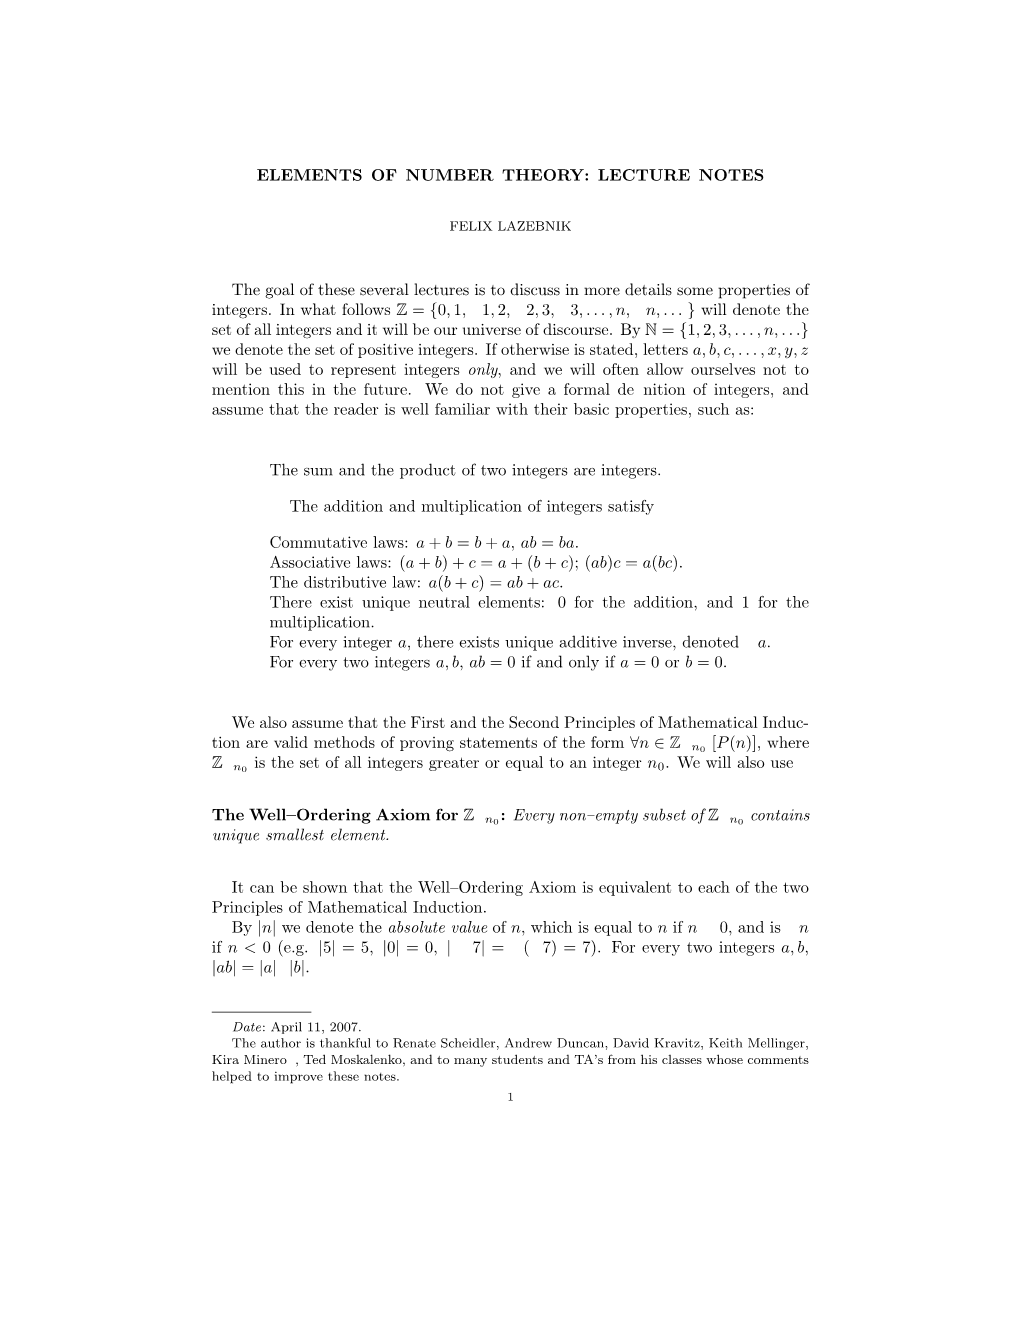 Elements of Number Theory: Lecture Notes